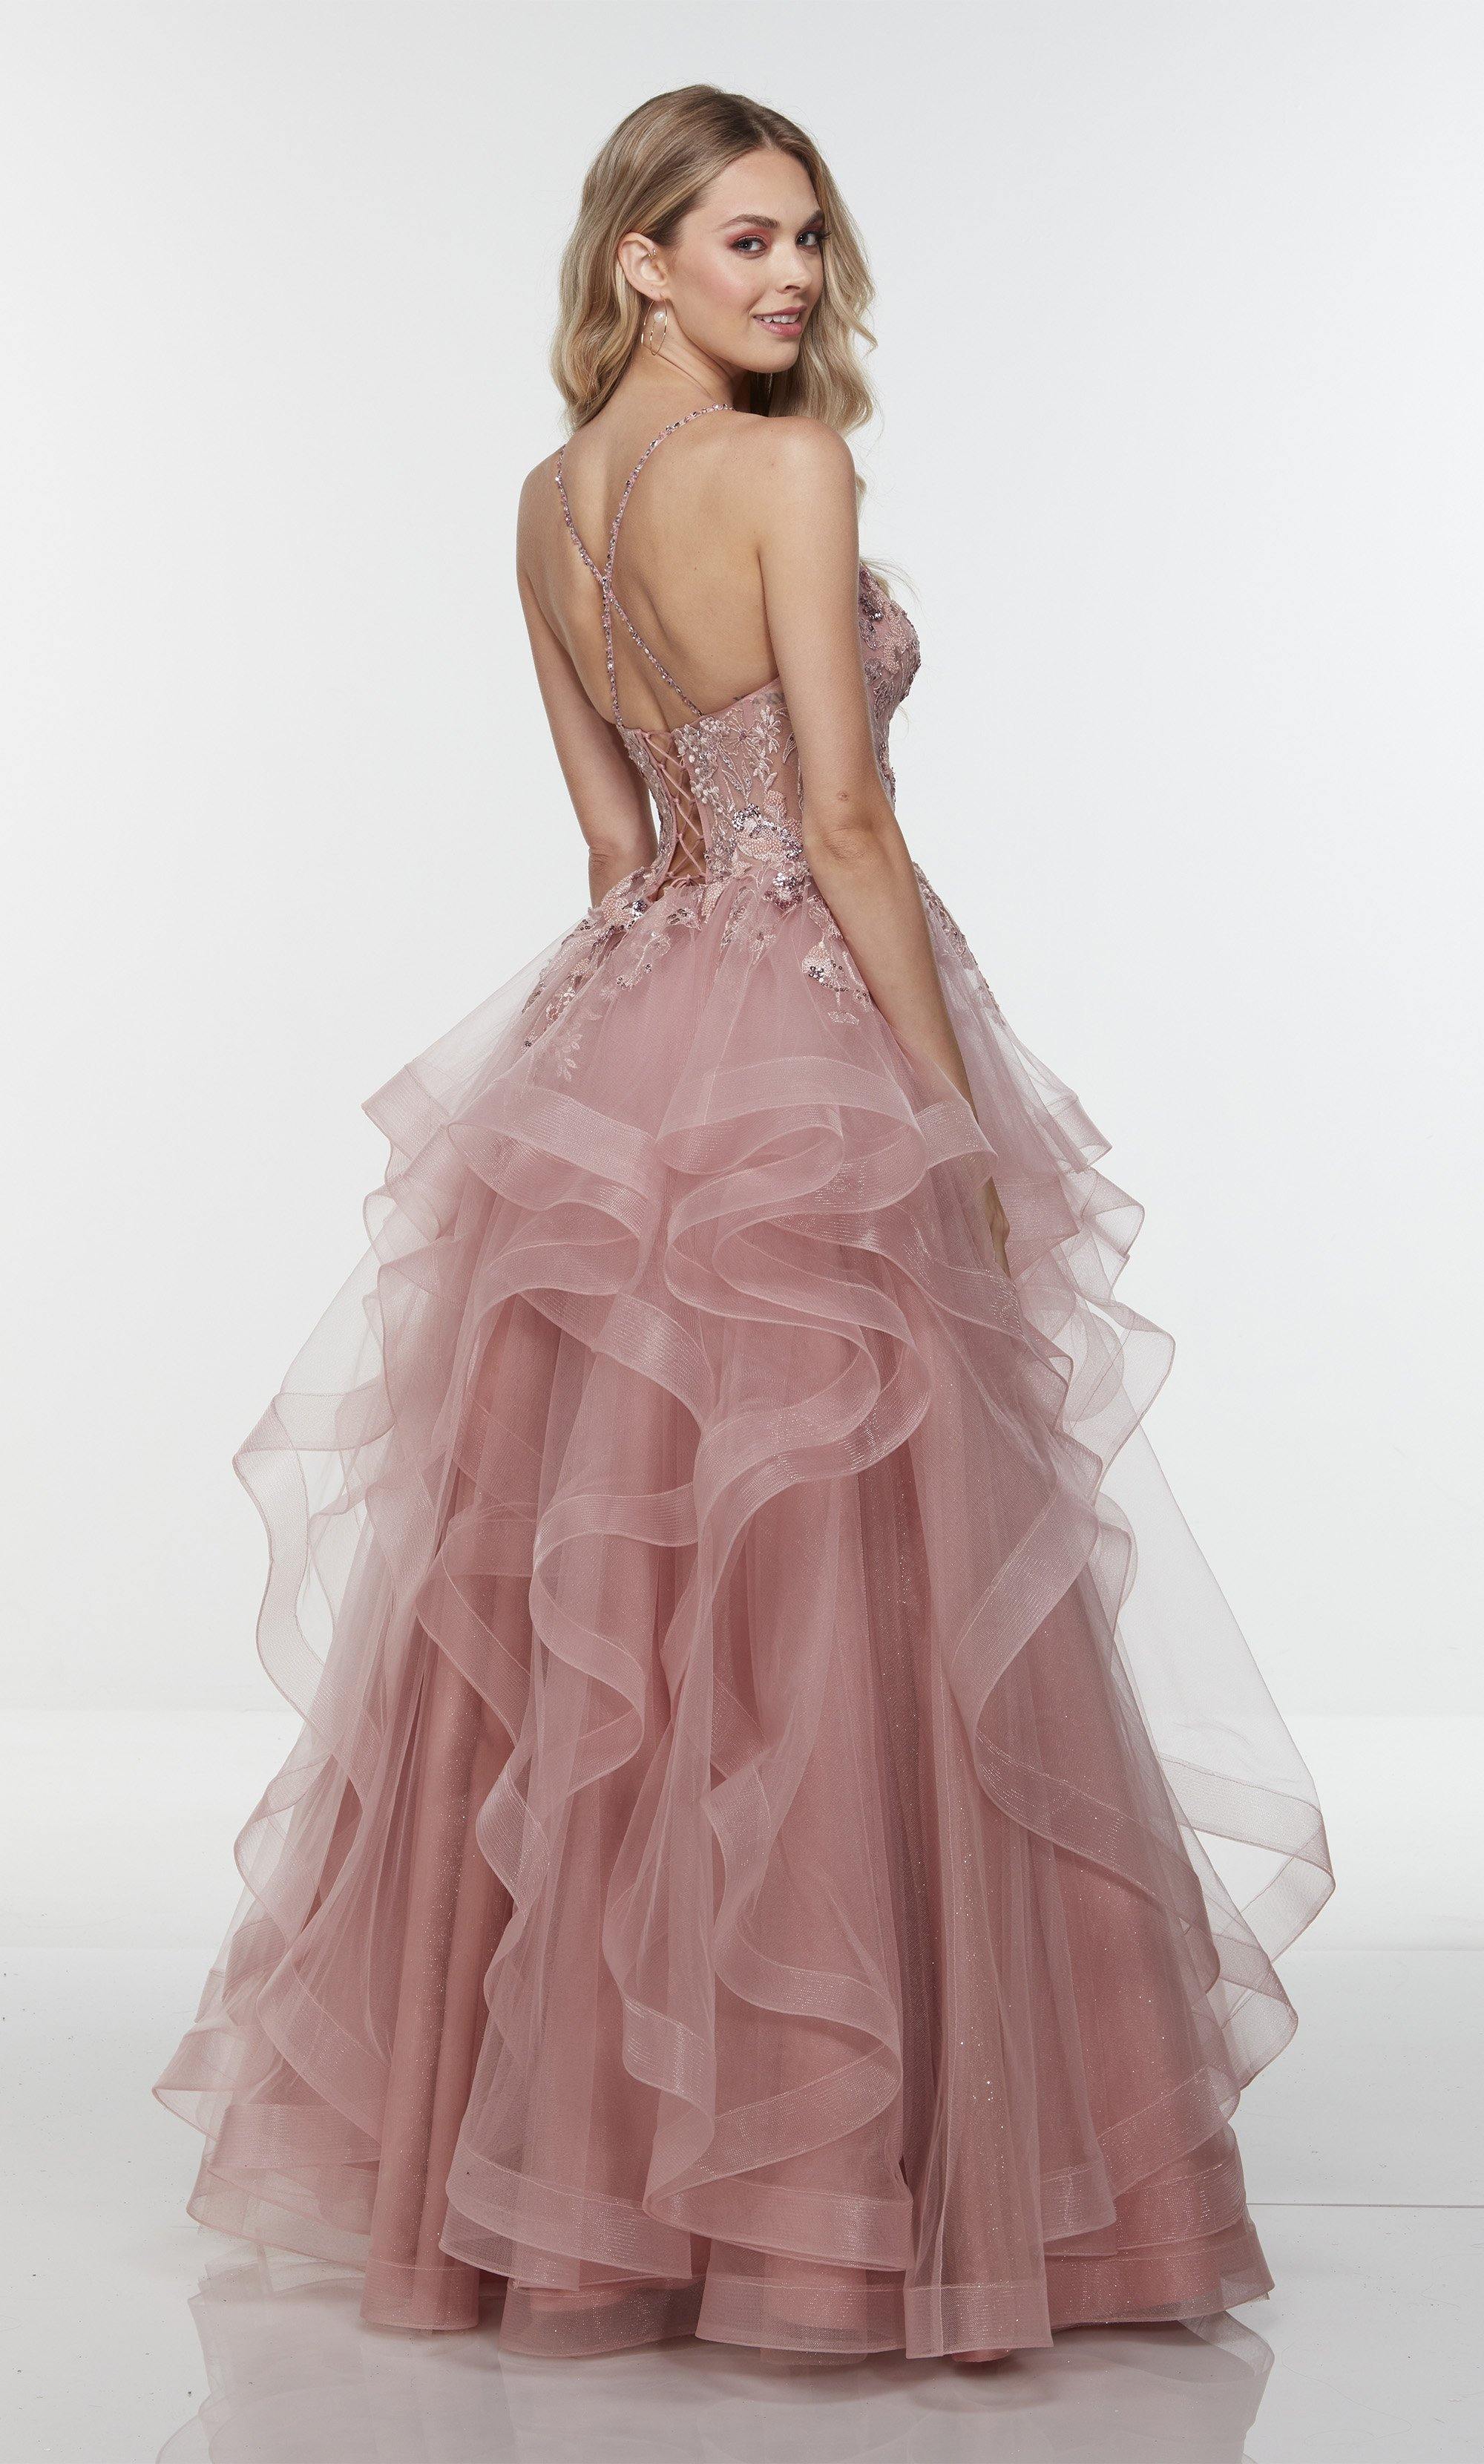 Honey Couture DEMIKA Blush Pink 3D Flowers Tulle Formal Gown Dress